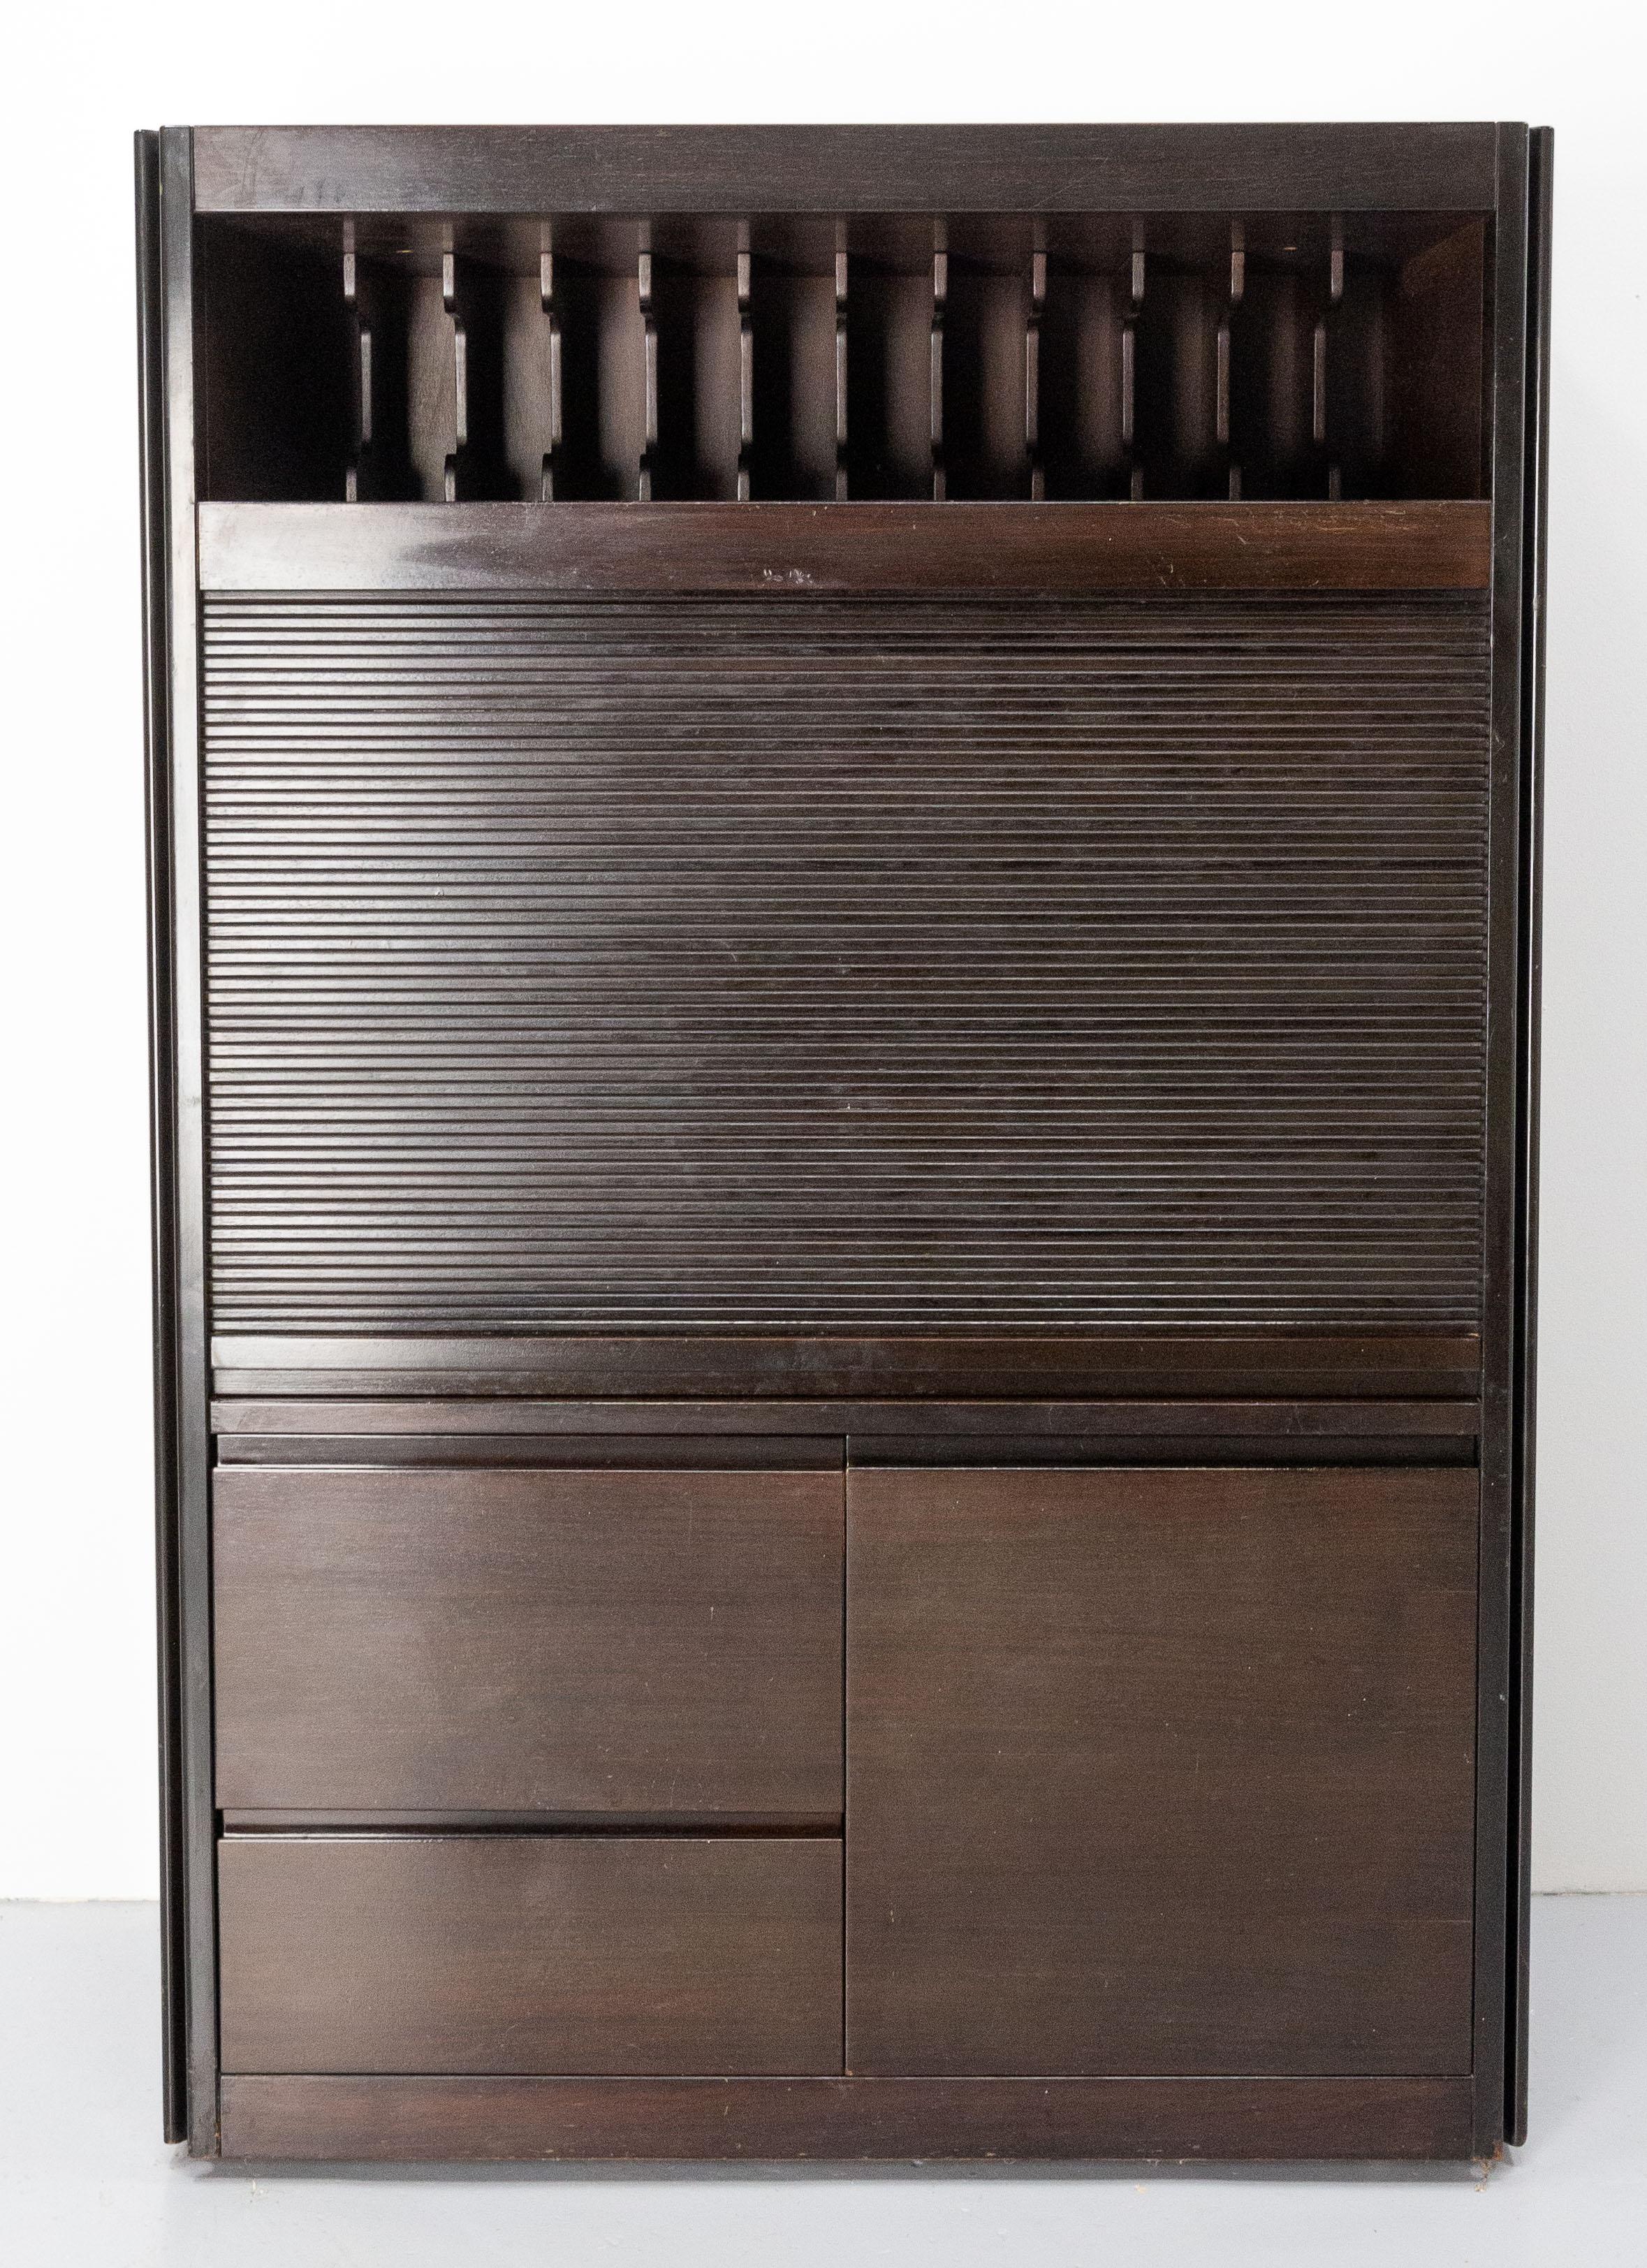 Cabinet with a roller door, or roll-top tambour door
France, circa 1980.
The shelves of the documents binder can be removable. This top-part is 7.48 in. high (19 cm).
The drawers have a very atypical size: the right one on the photos is D 32.28/W